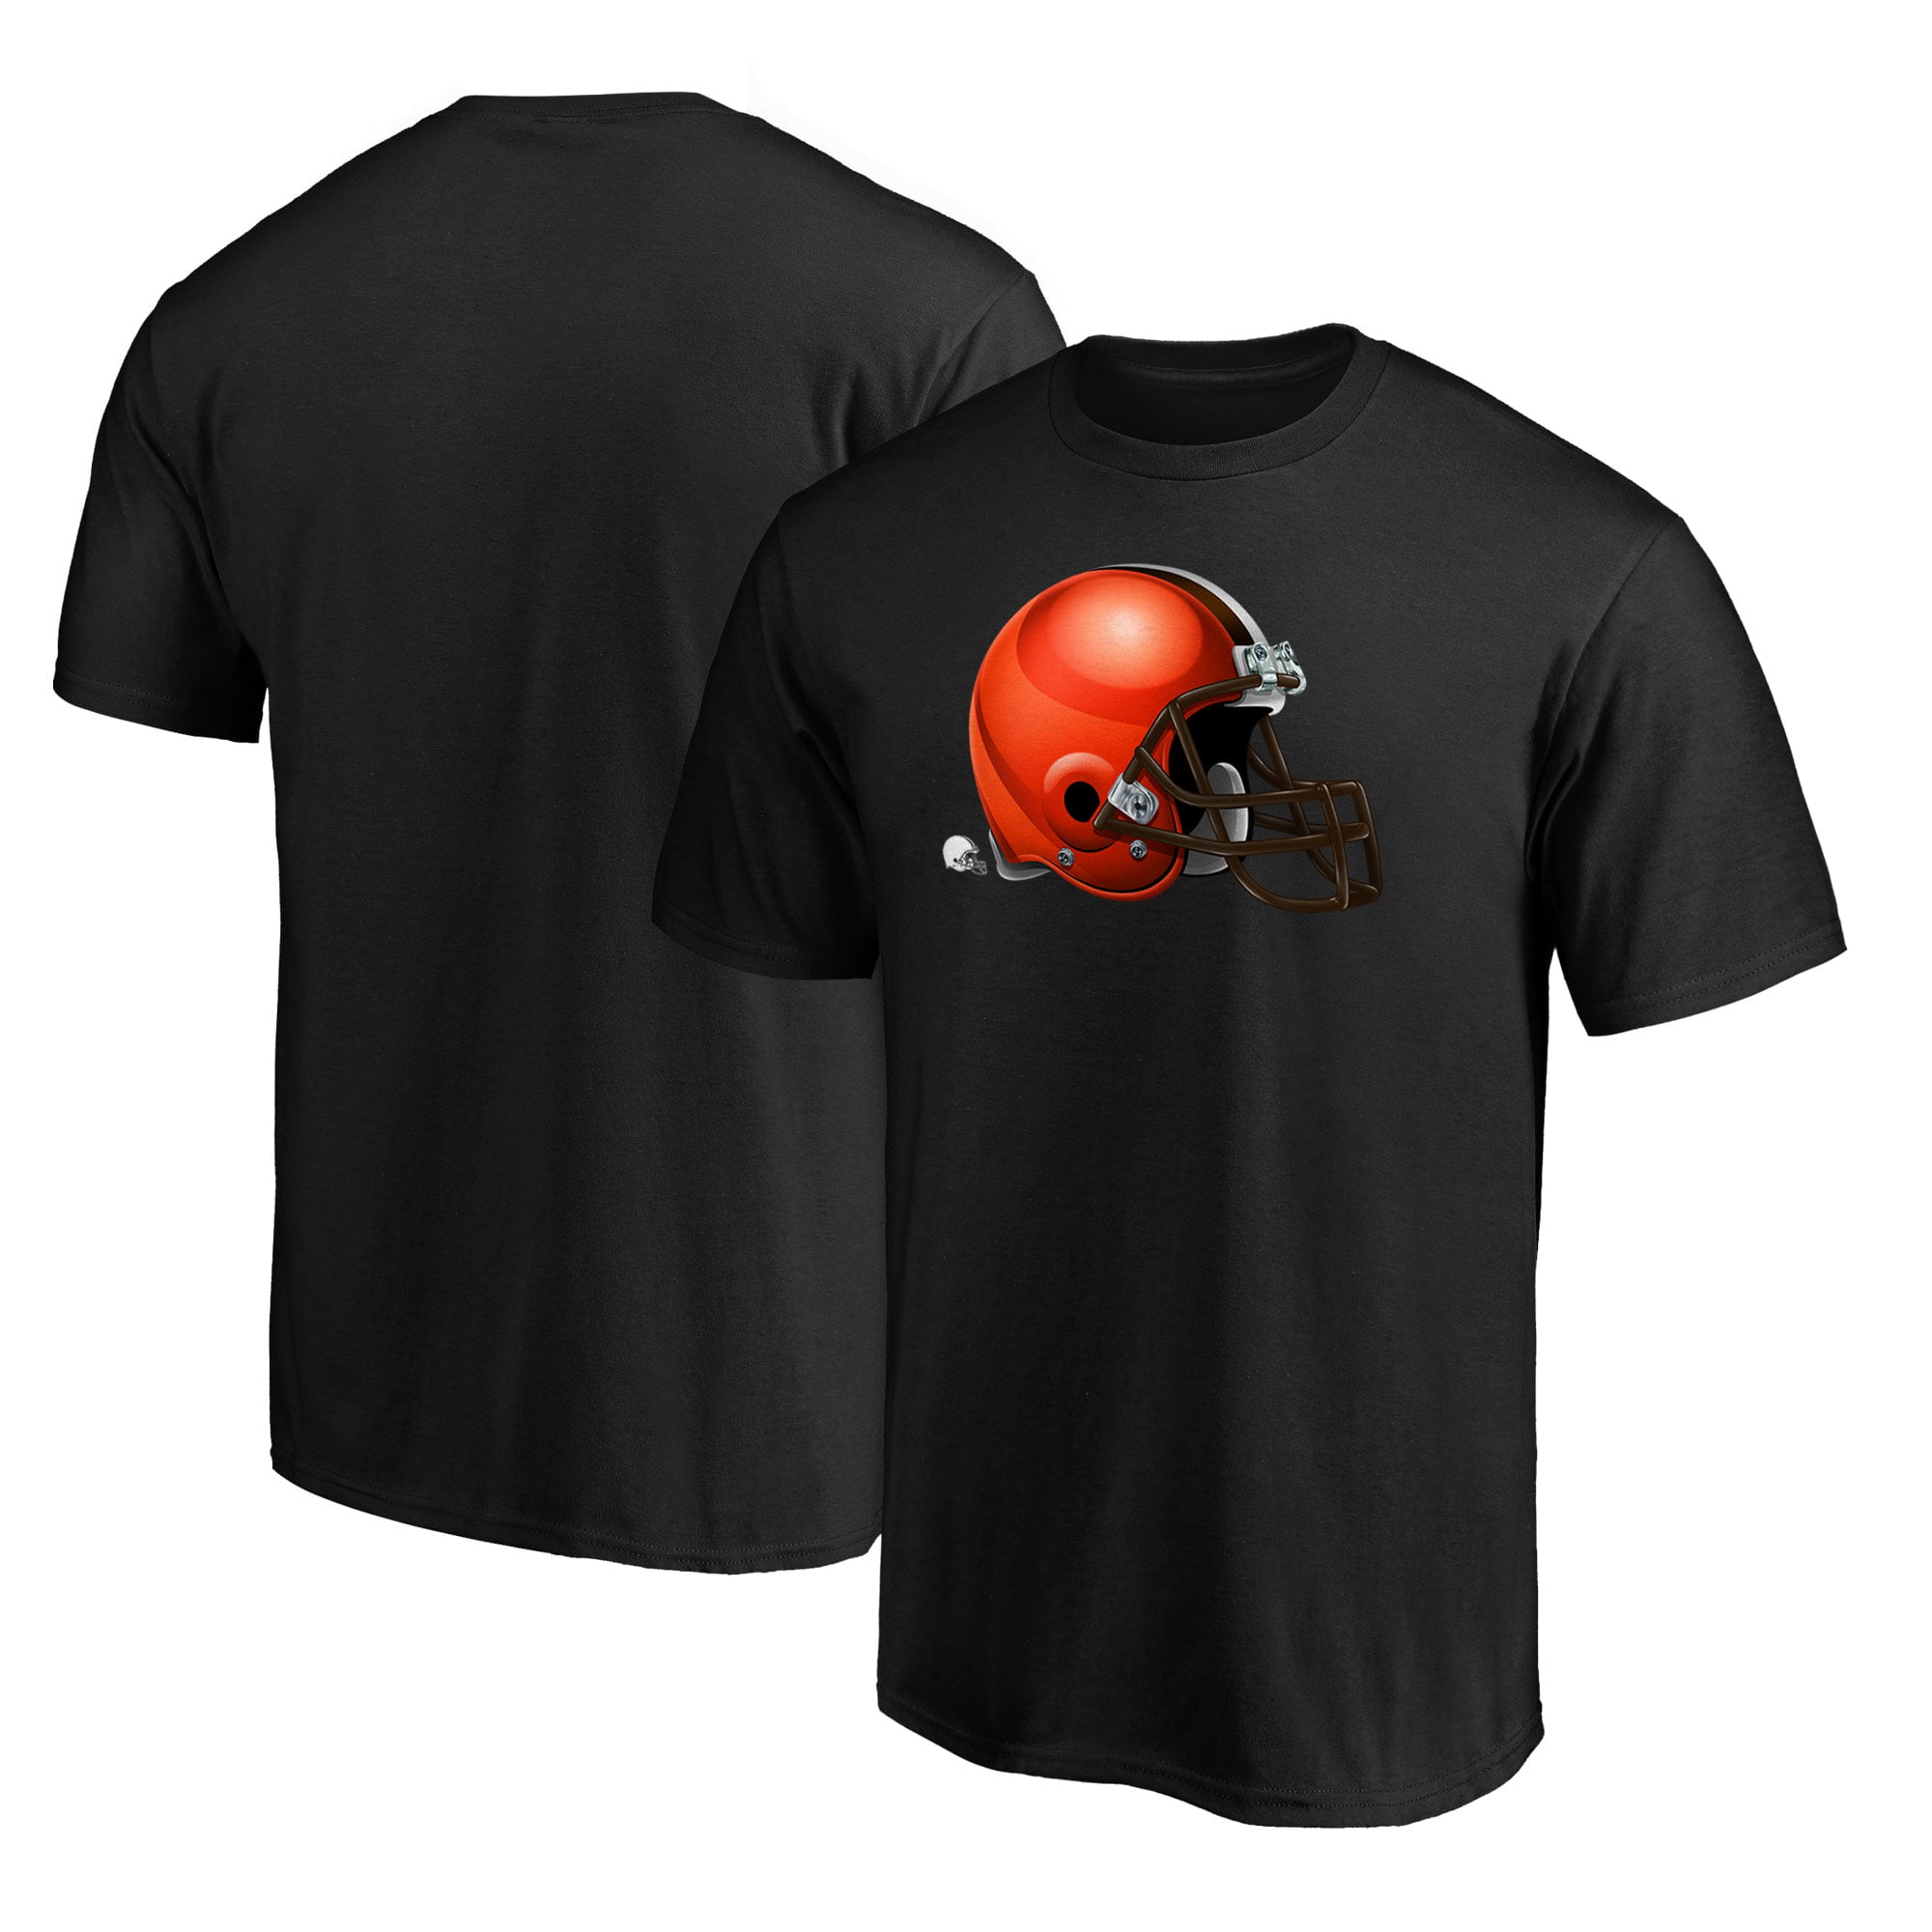 cleveland browns game blacked out